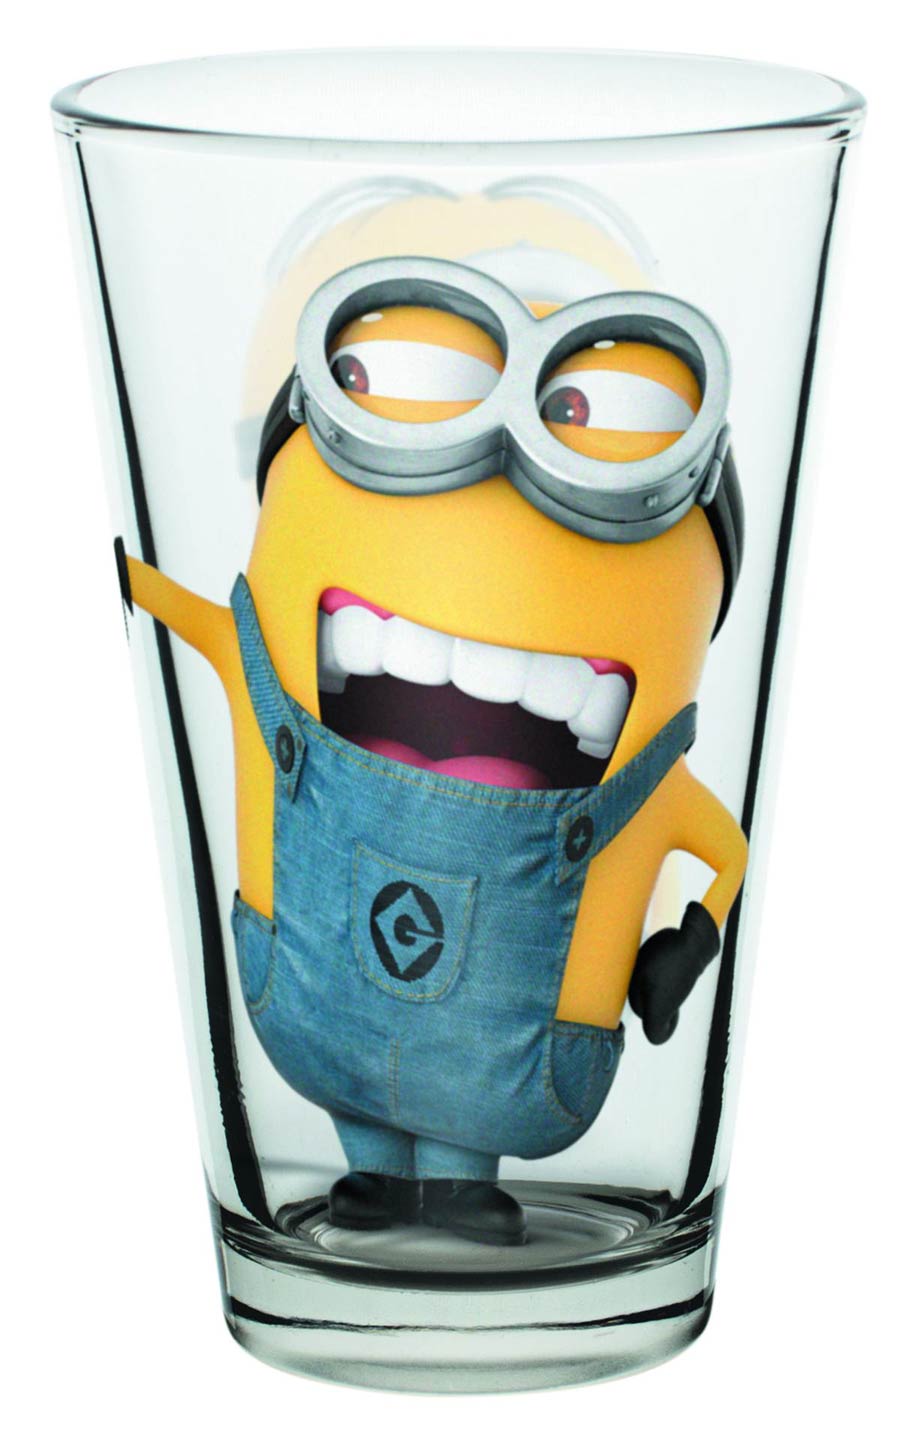 Minions 10-Ounce Juice Glass - Laughing